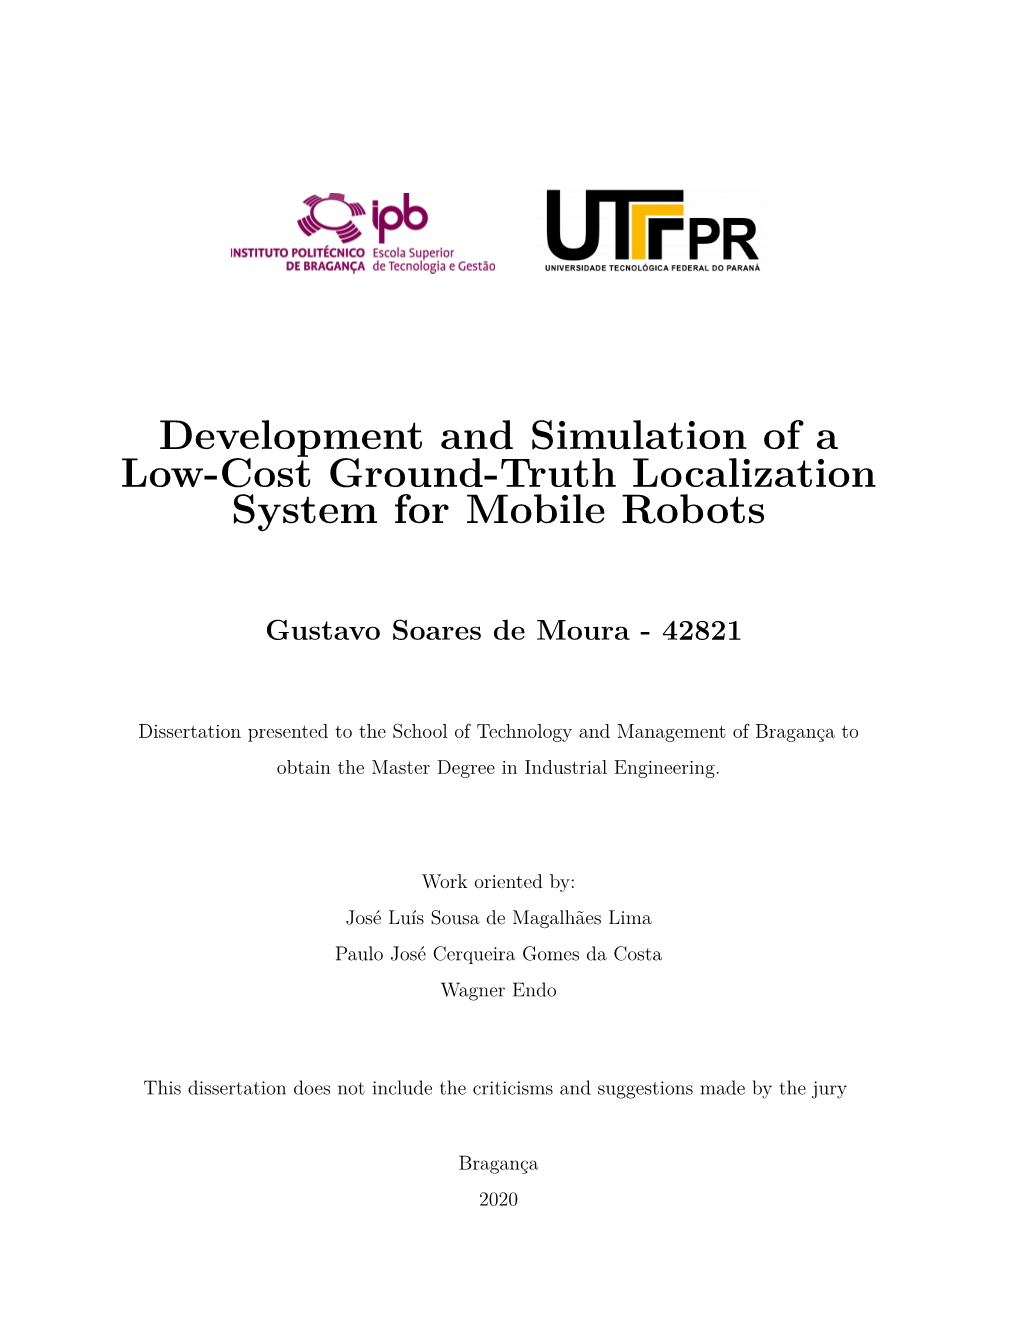 Development and Simulation of a Low-Cost Ground-Truth Localization System for Mobile Robots